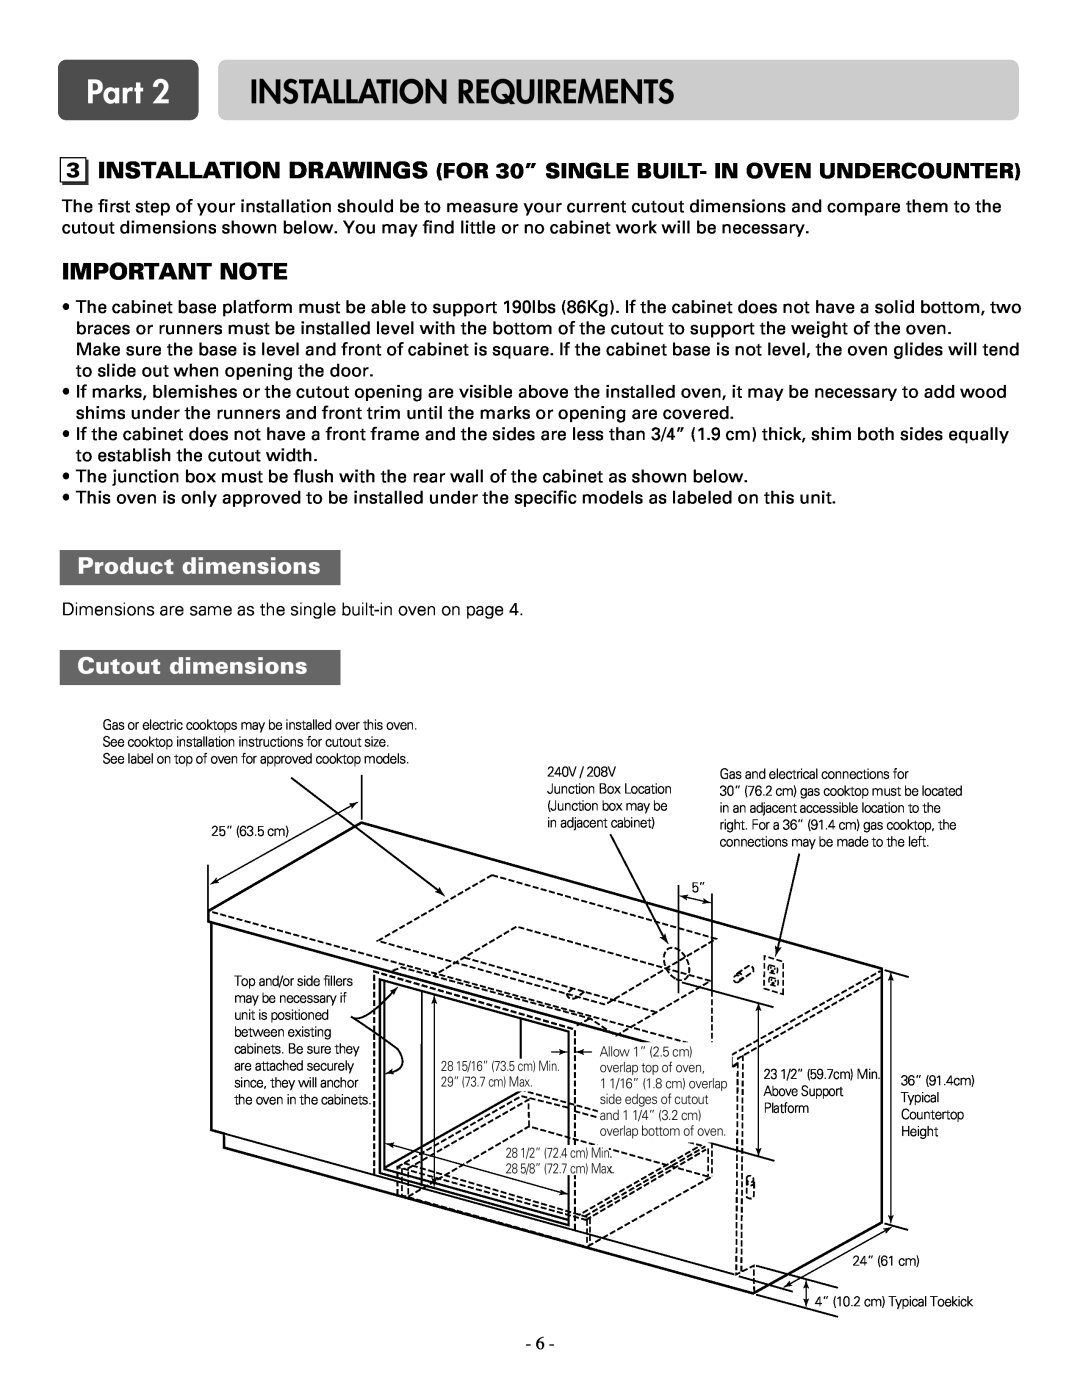 LG Electronics LSWS305ST Part 2 INSTALLATION REQUIREMENTS, Important Note, Product dimensions, Cutout dimensions 